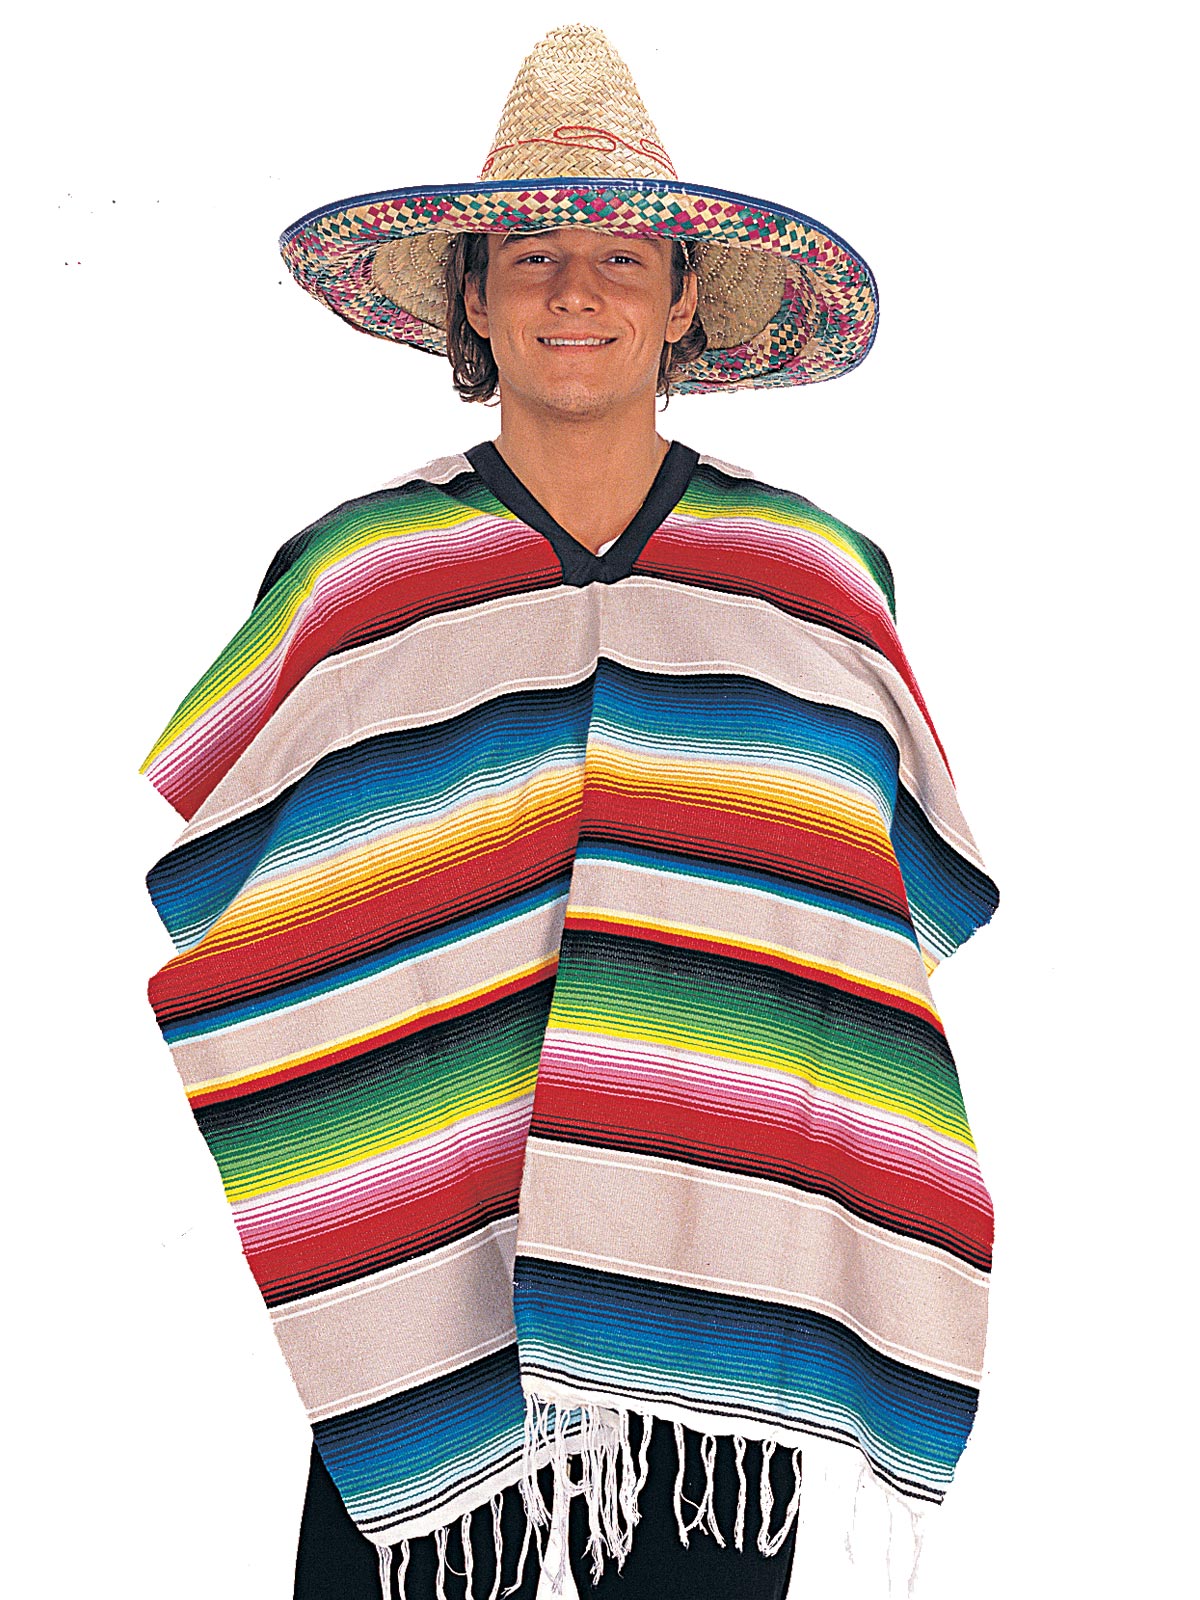 MEXICAN PONCHO ADULT Unisex Men's Womens Costume Accessory